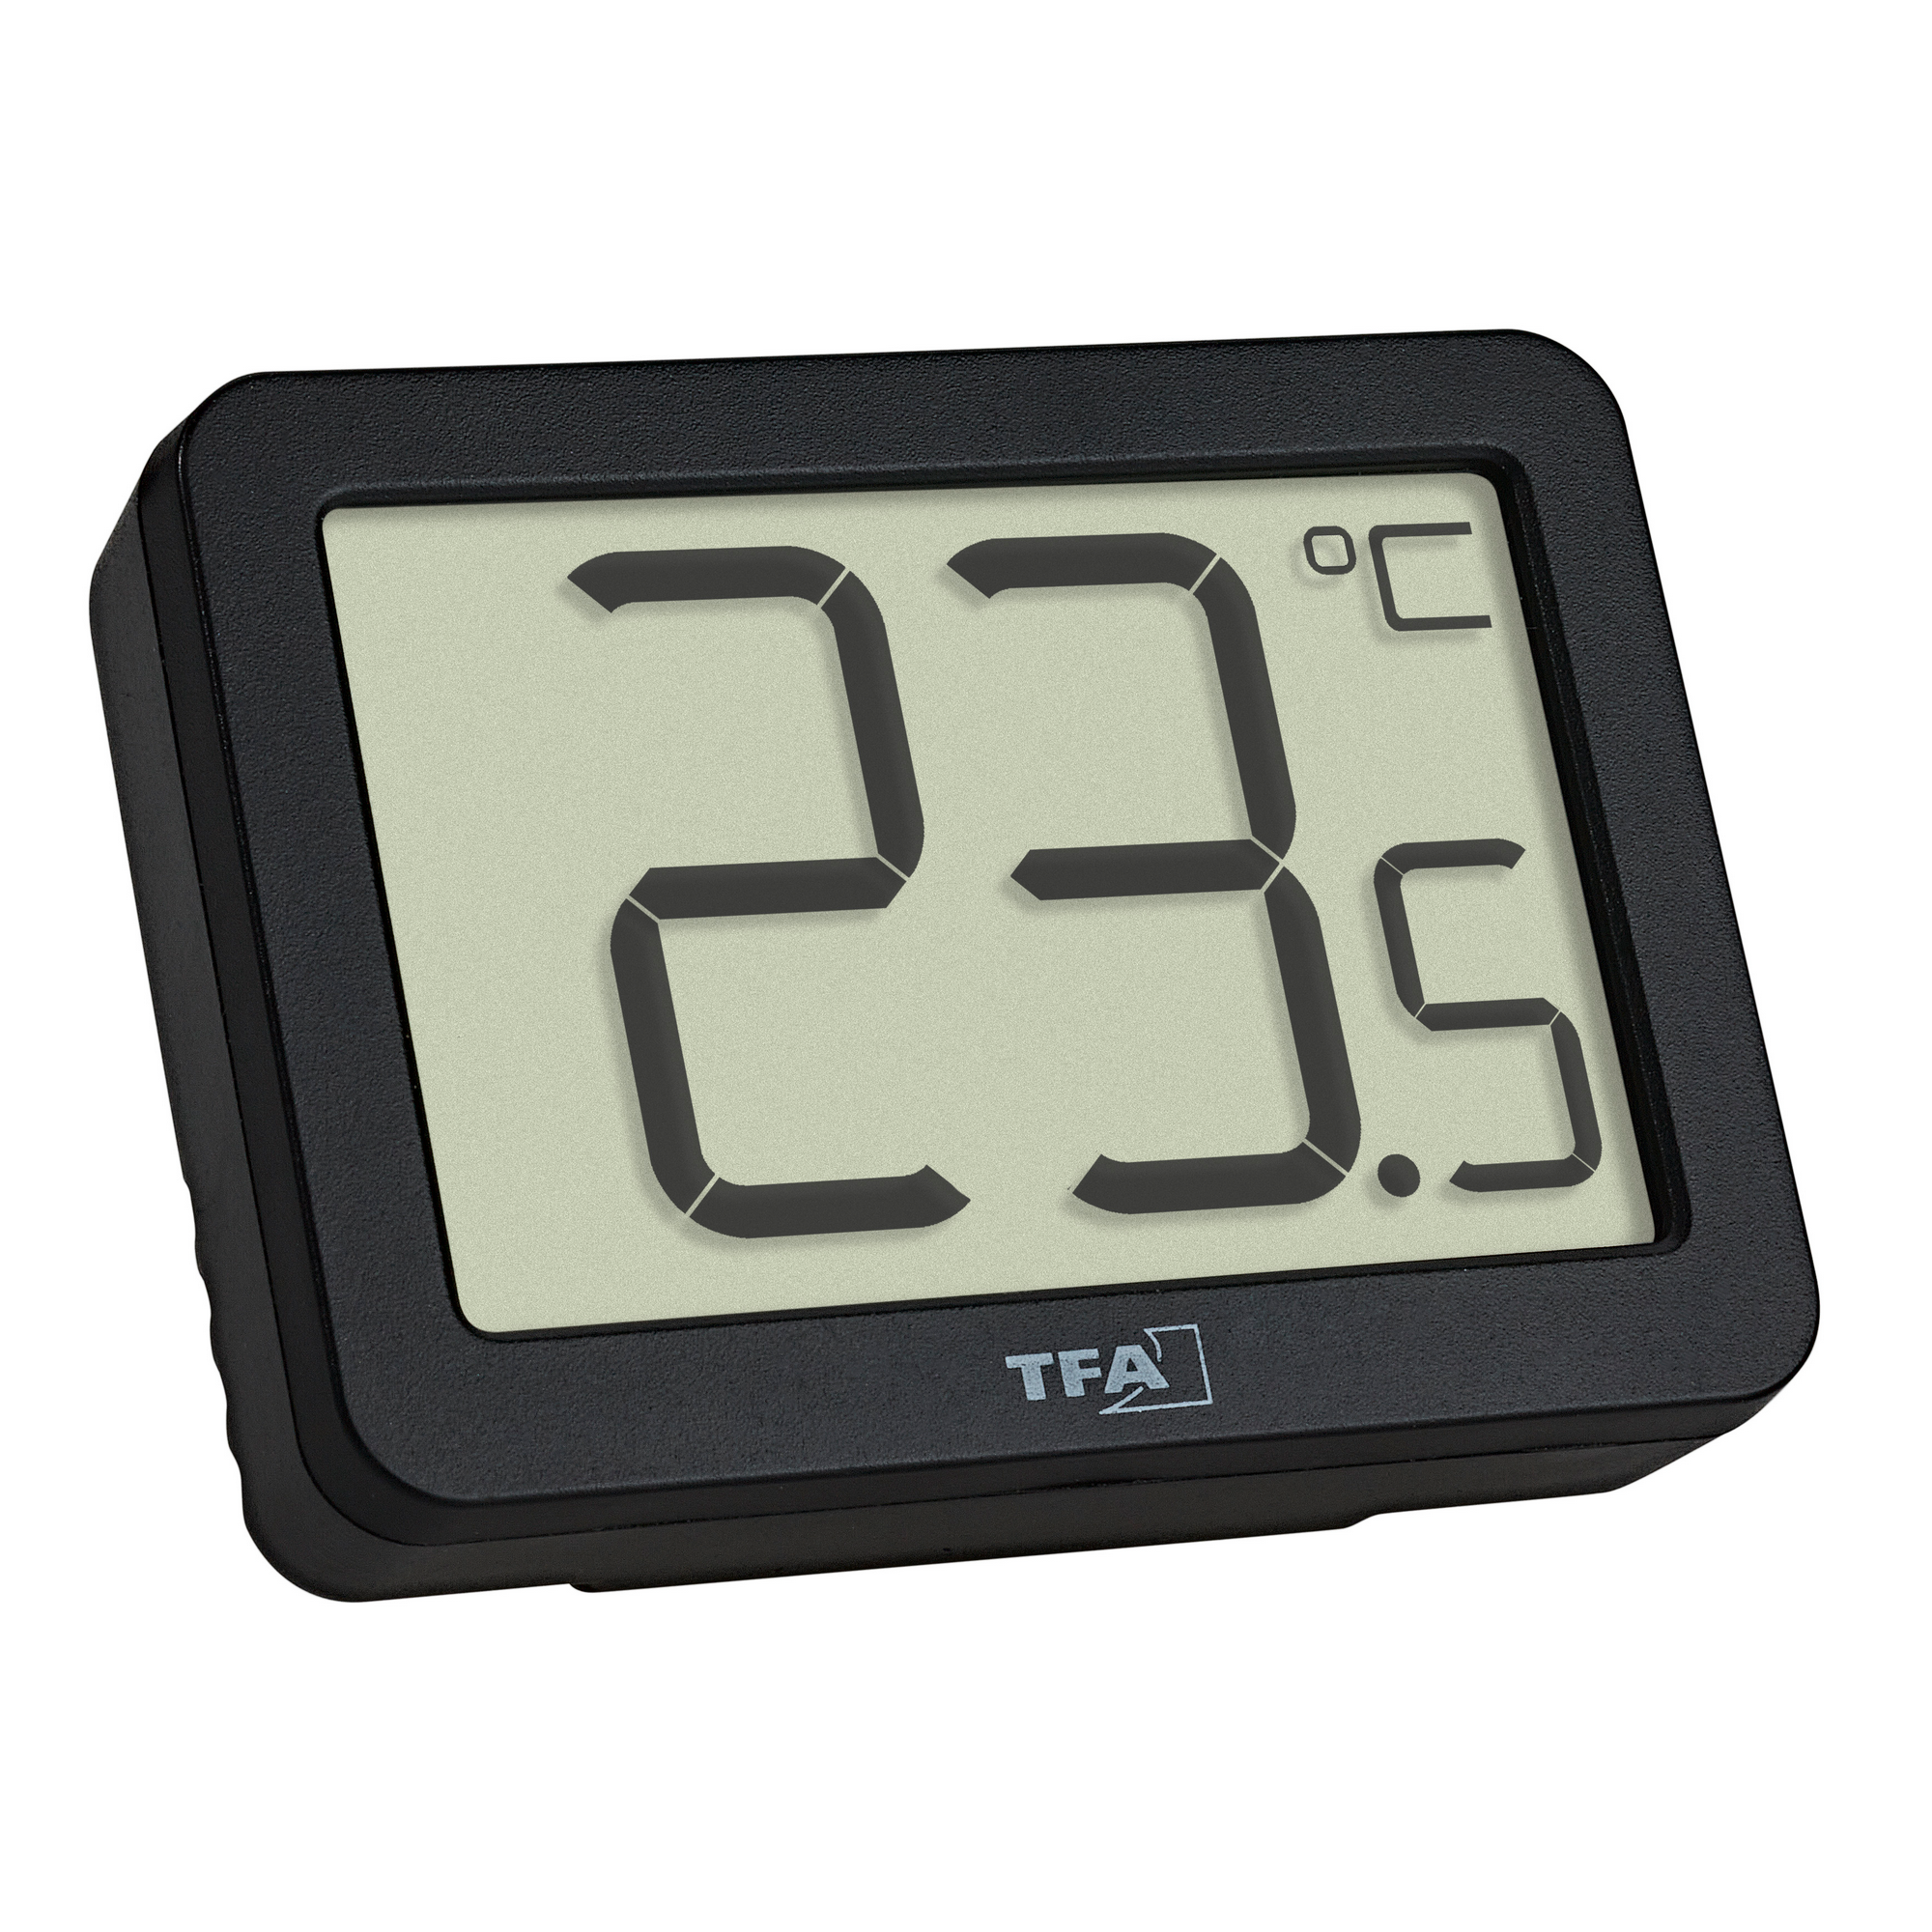 Digitales Mini-Thermometer Kunststoff schwarz 5,5 x 1,5 x 4 cm + product picture